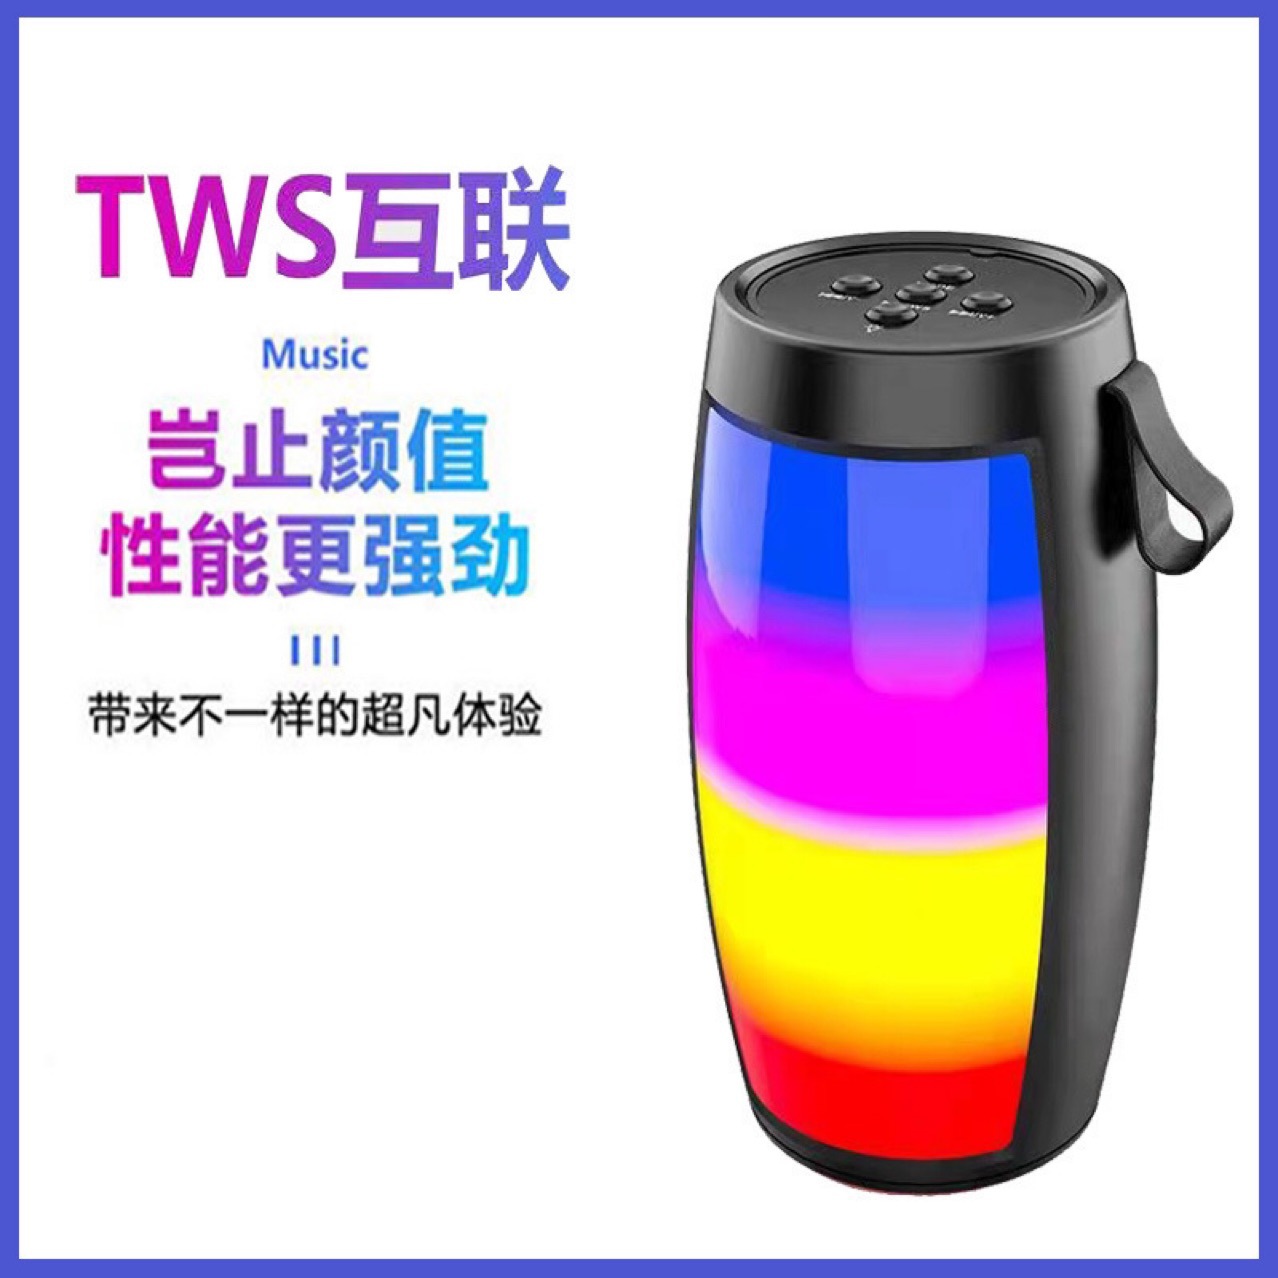 Factory Delivery Pulse 1202 Bluetooth Speaker Wireless Mobile Phone Night Colorful Computer Card Gift Bluetooth Speaker